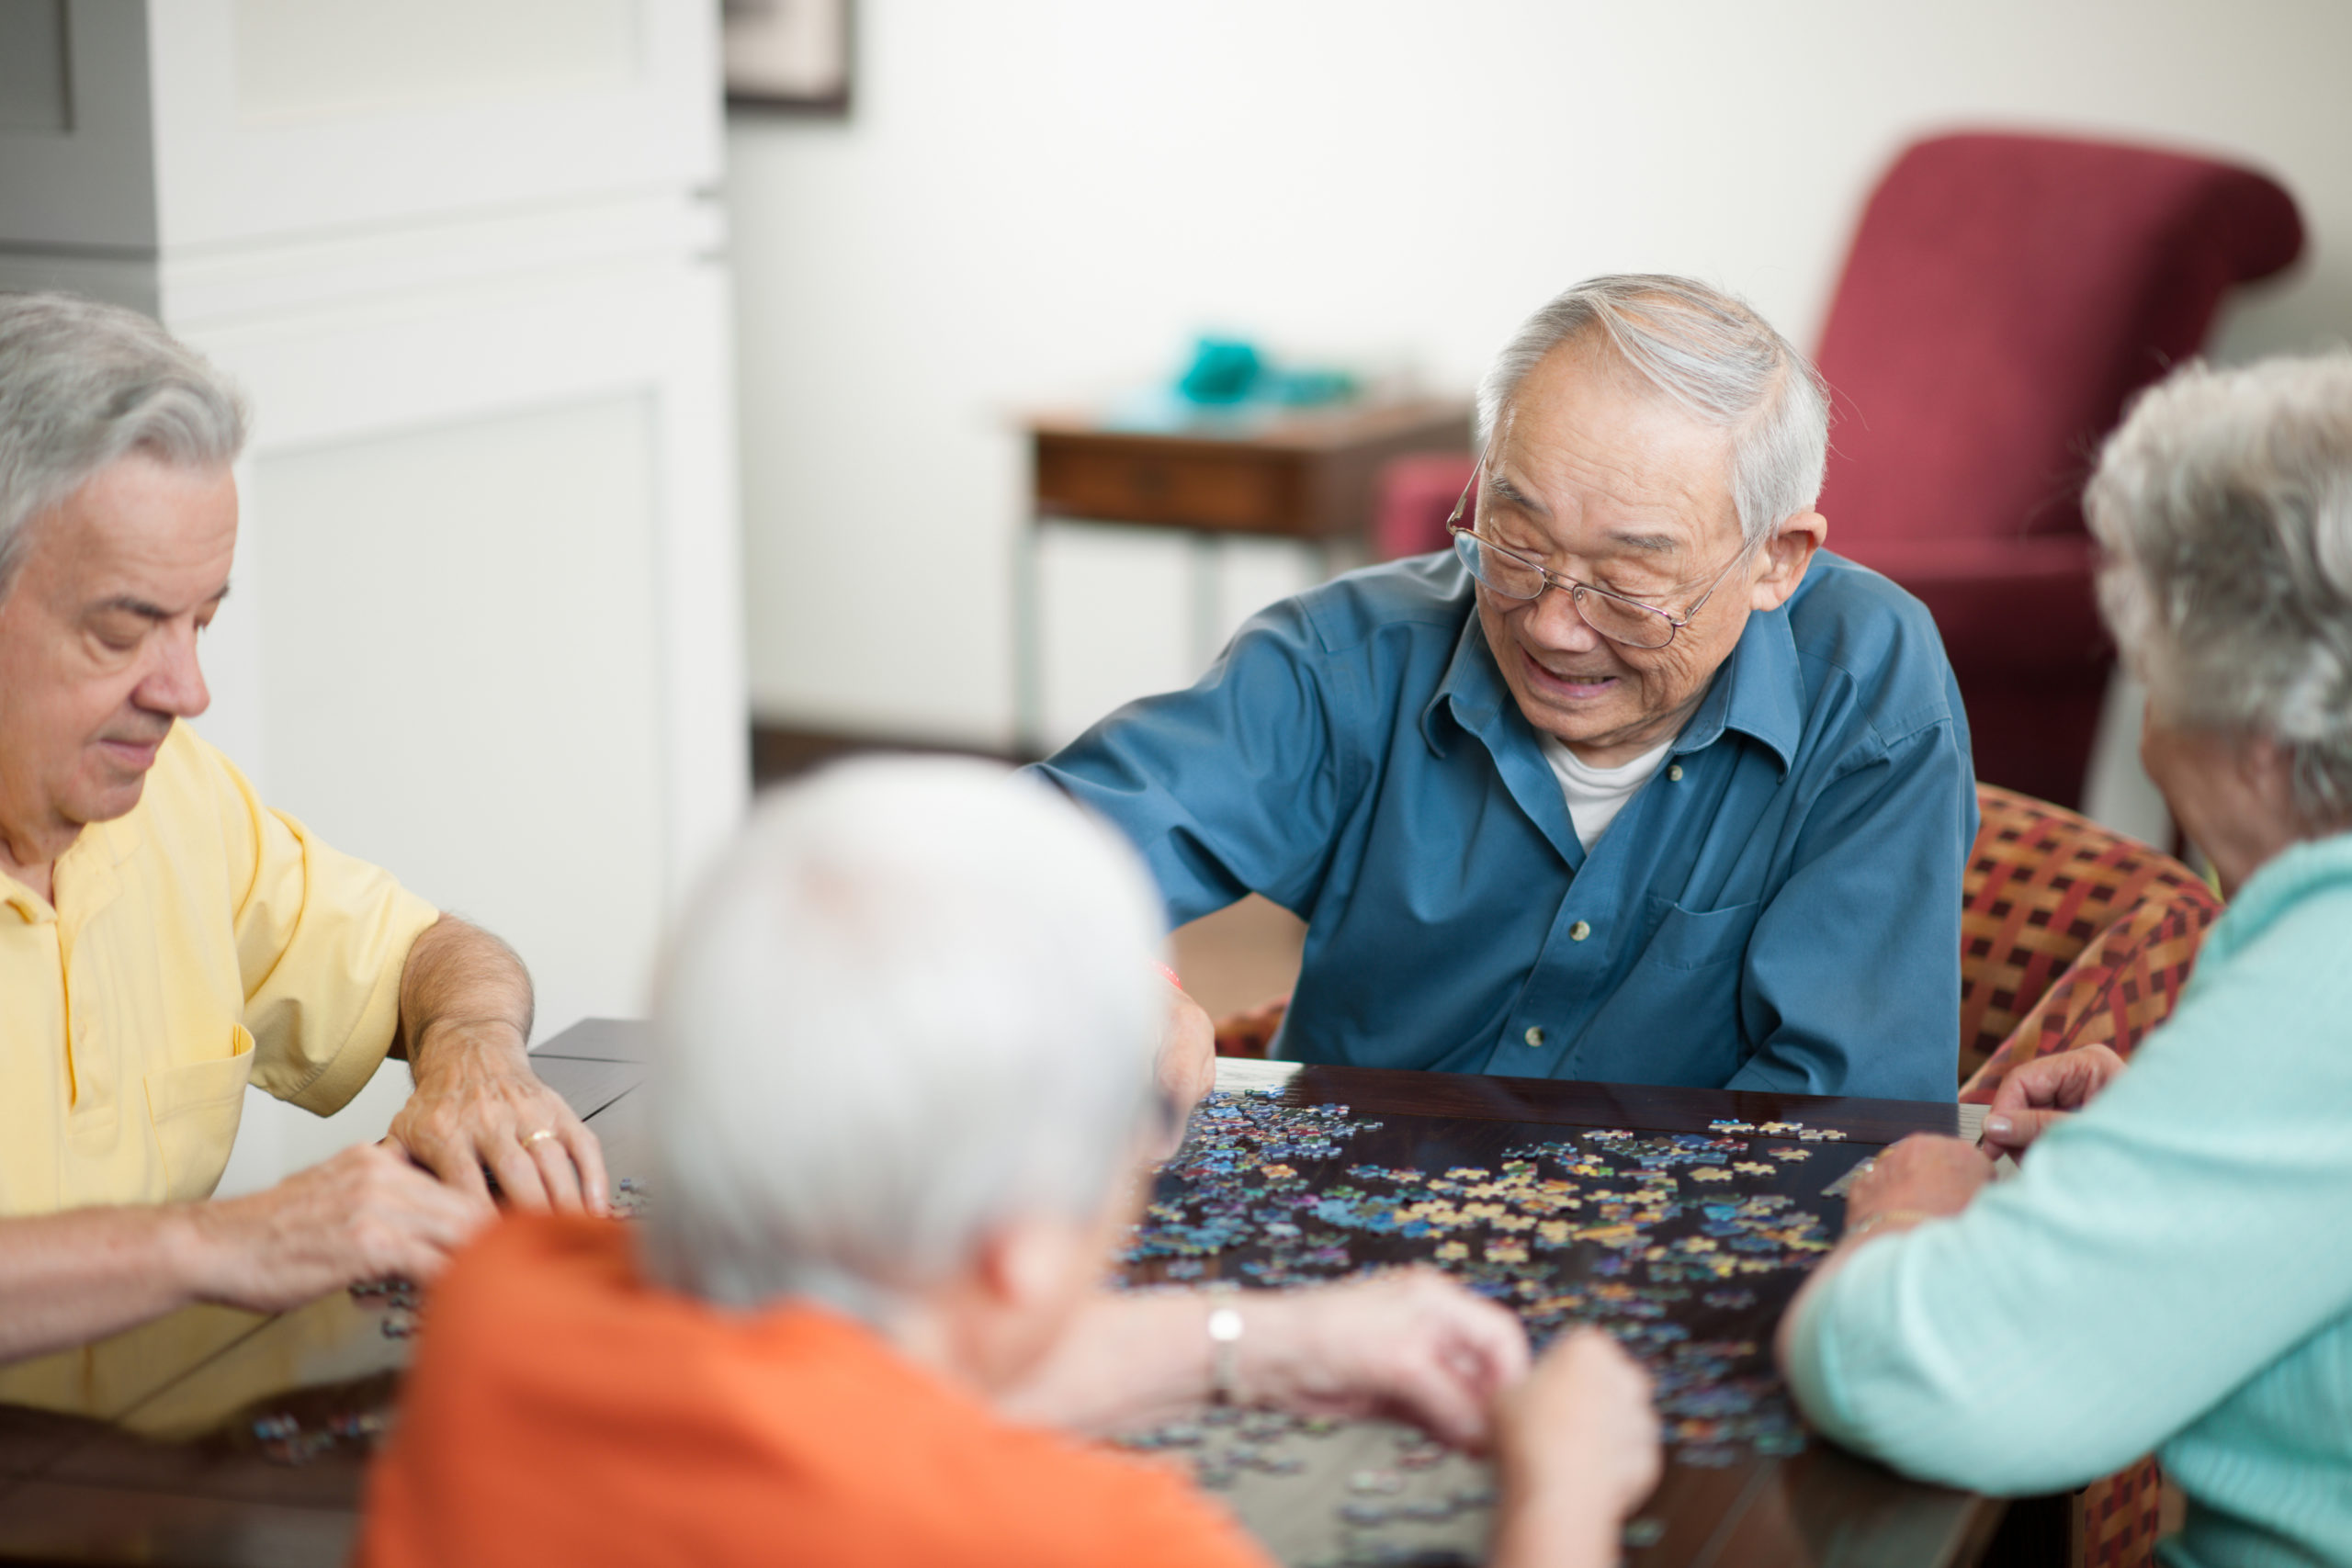 At St. Margaret Hall we make it our top priority to keep our residents socially active